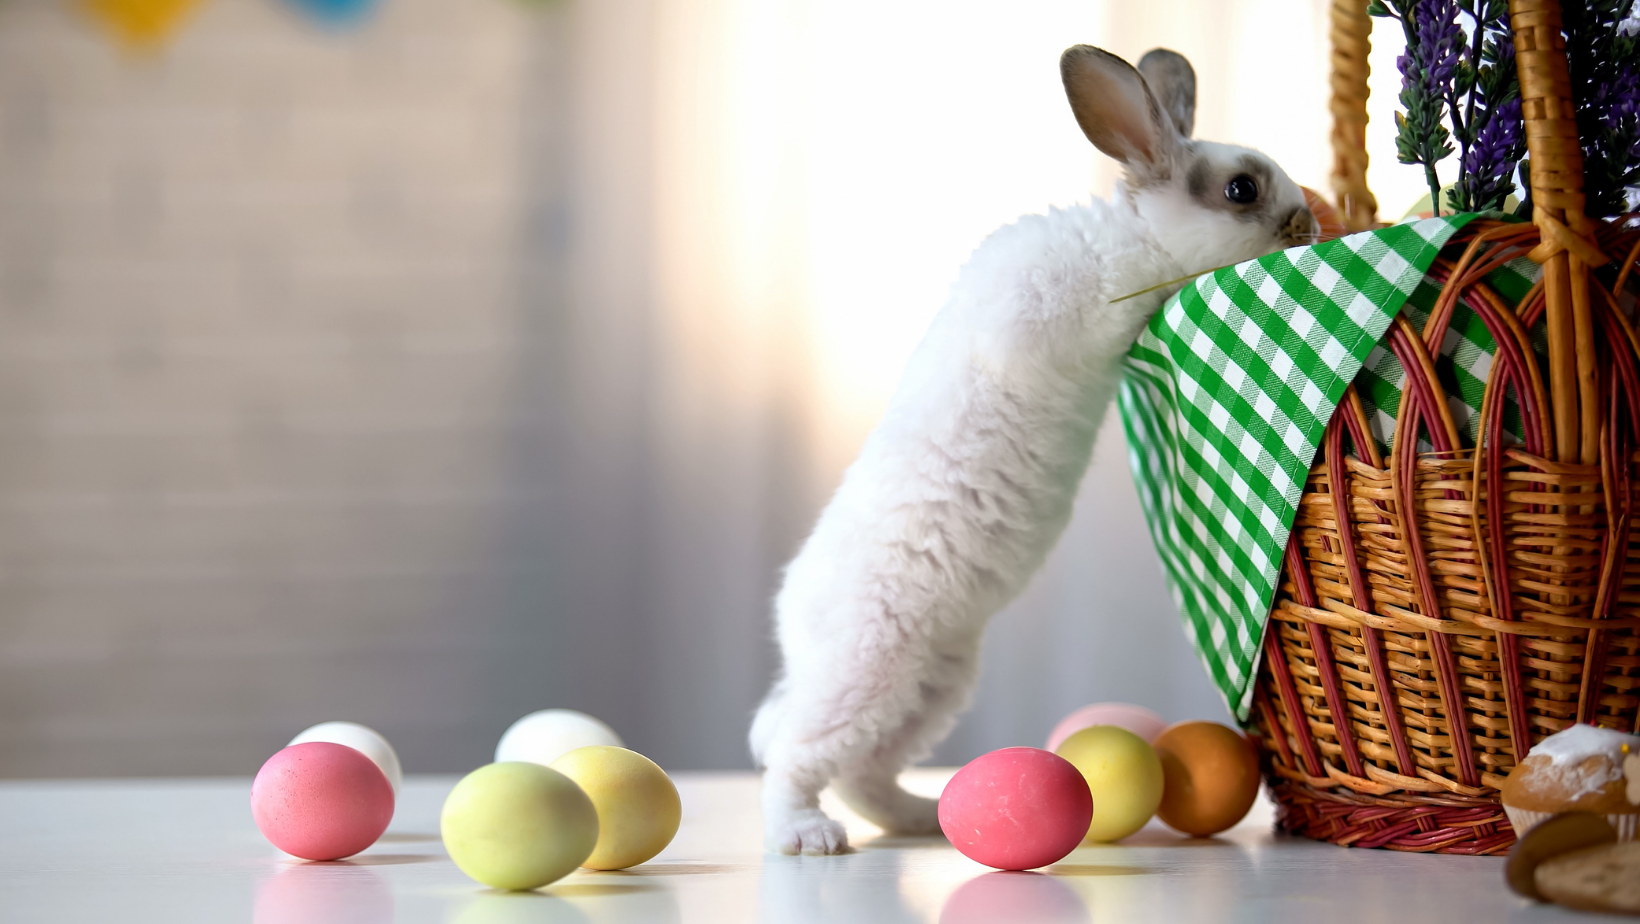 An inquisitive bunny is checking out an Easter basket